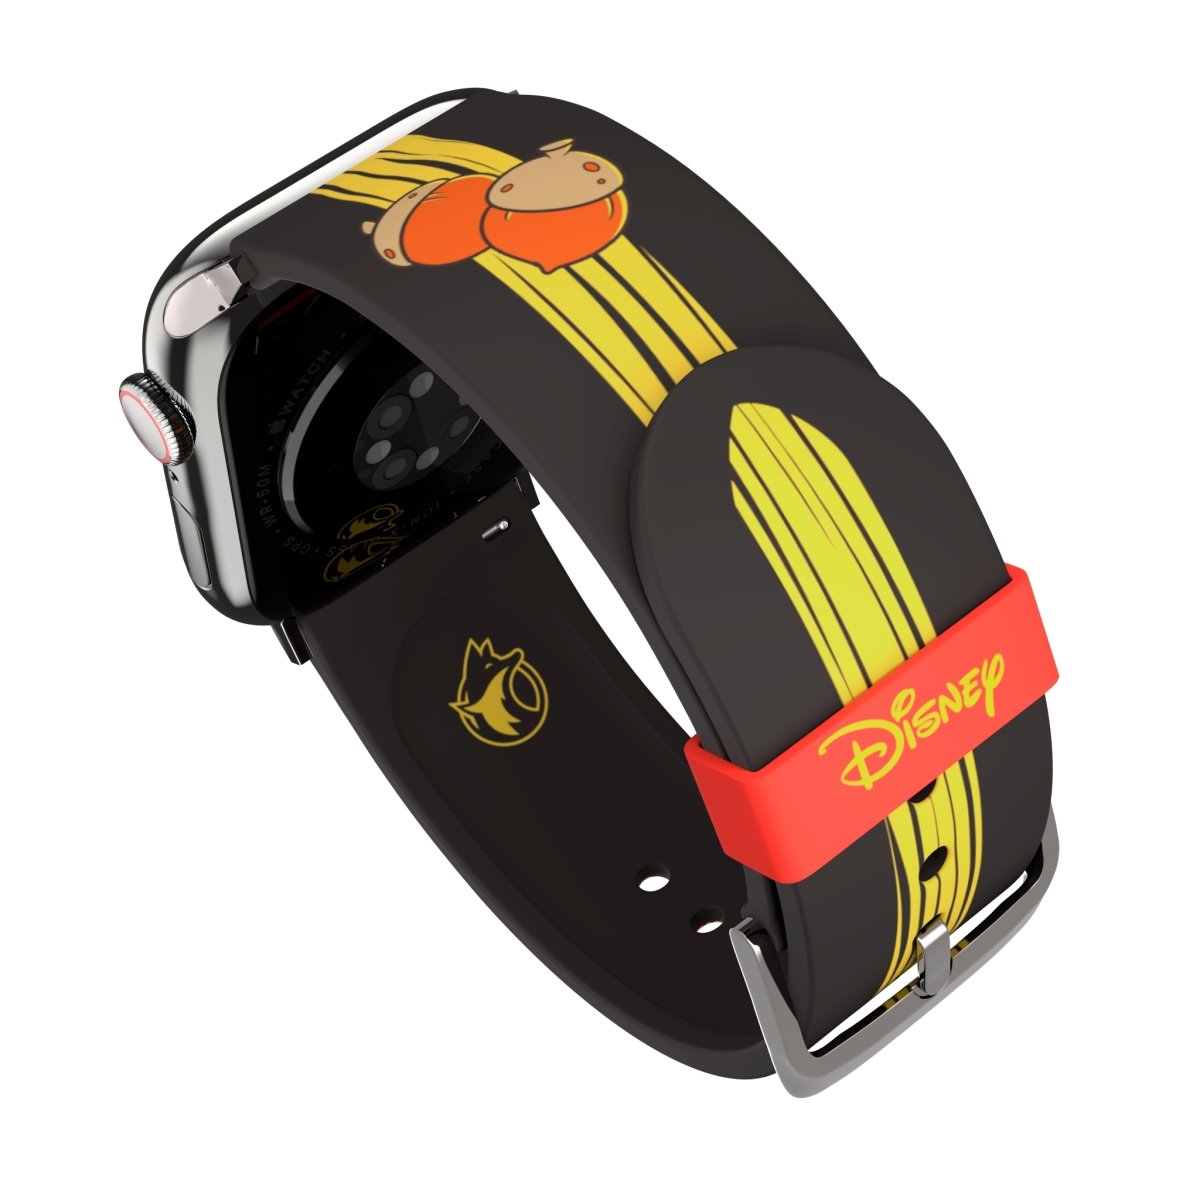 Chip ’n Dale - Rescue Rangers Smartwatch Band